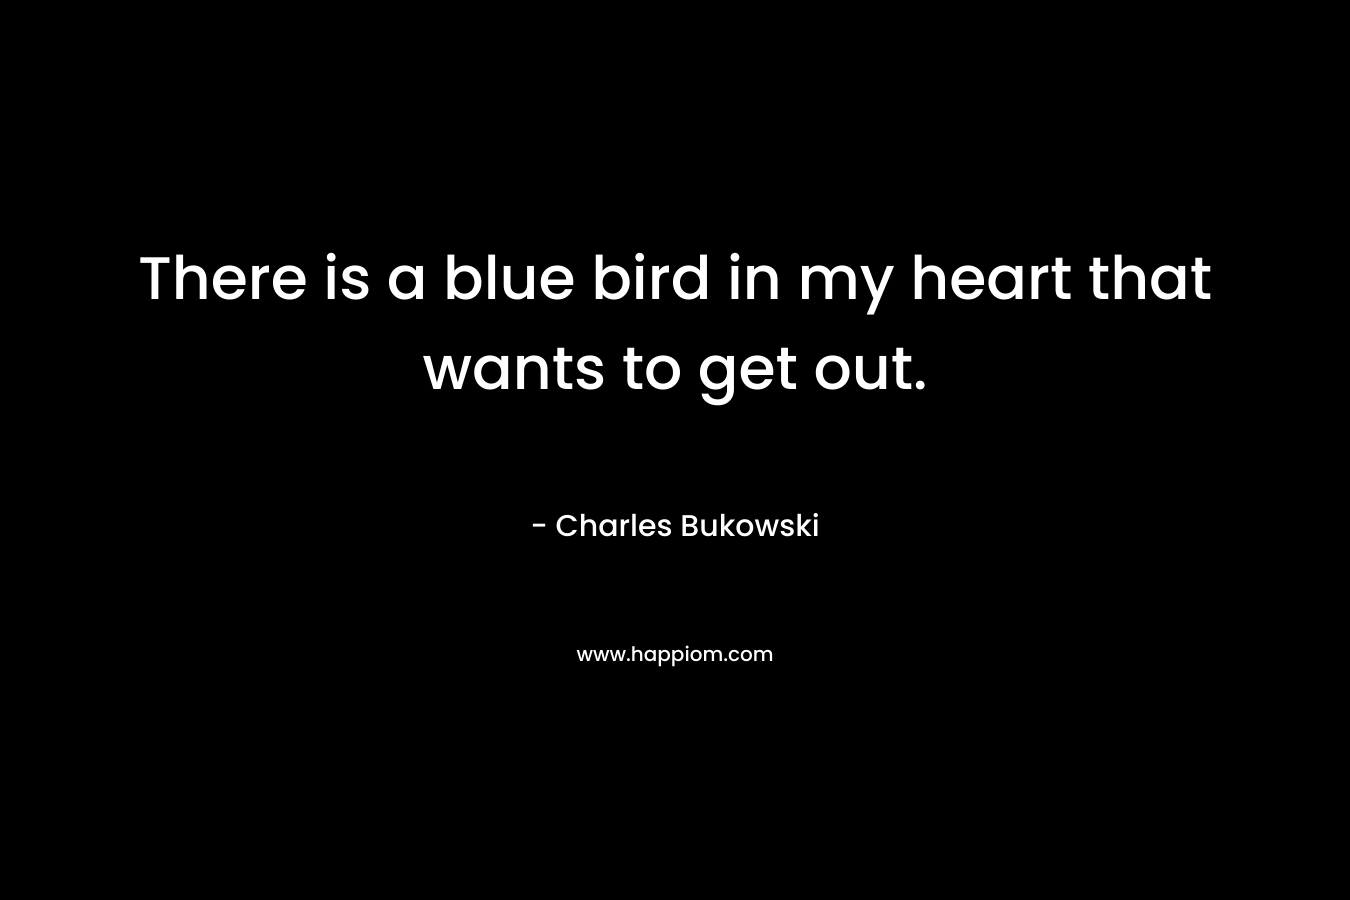 There is a blue bird in my heart that wants to get out.